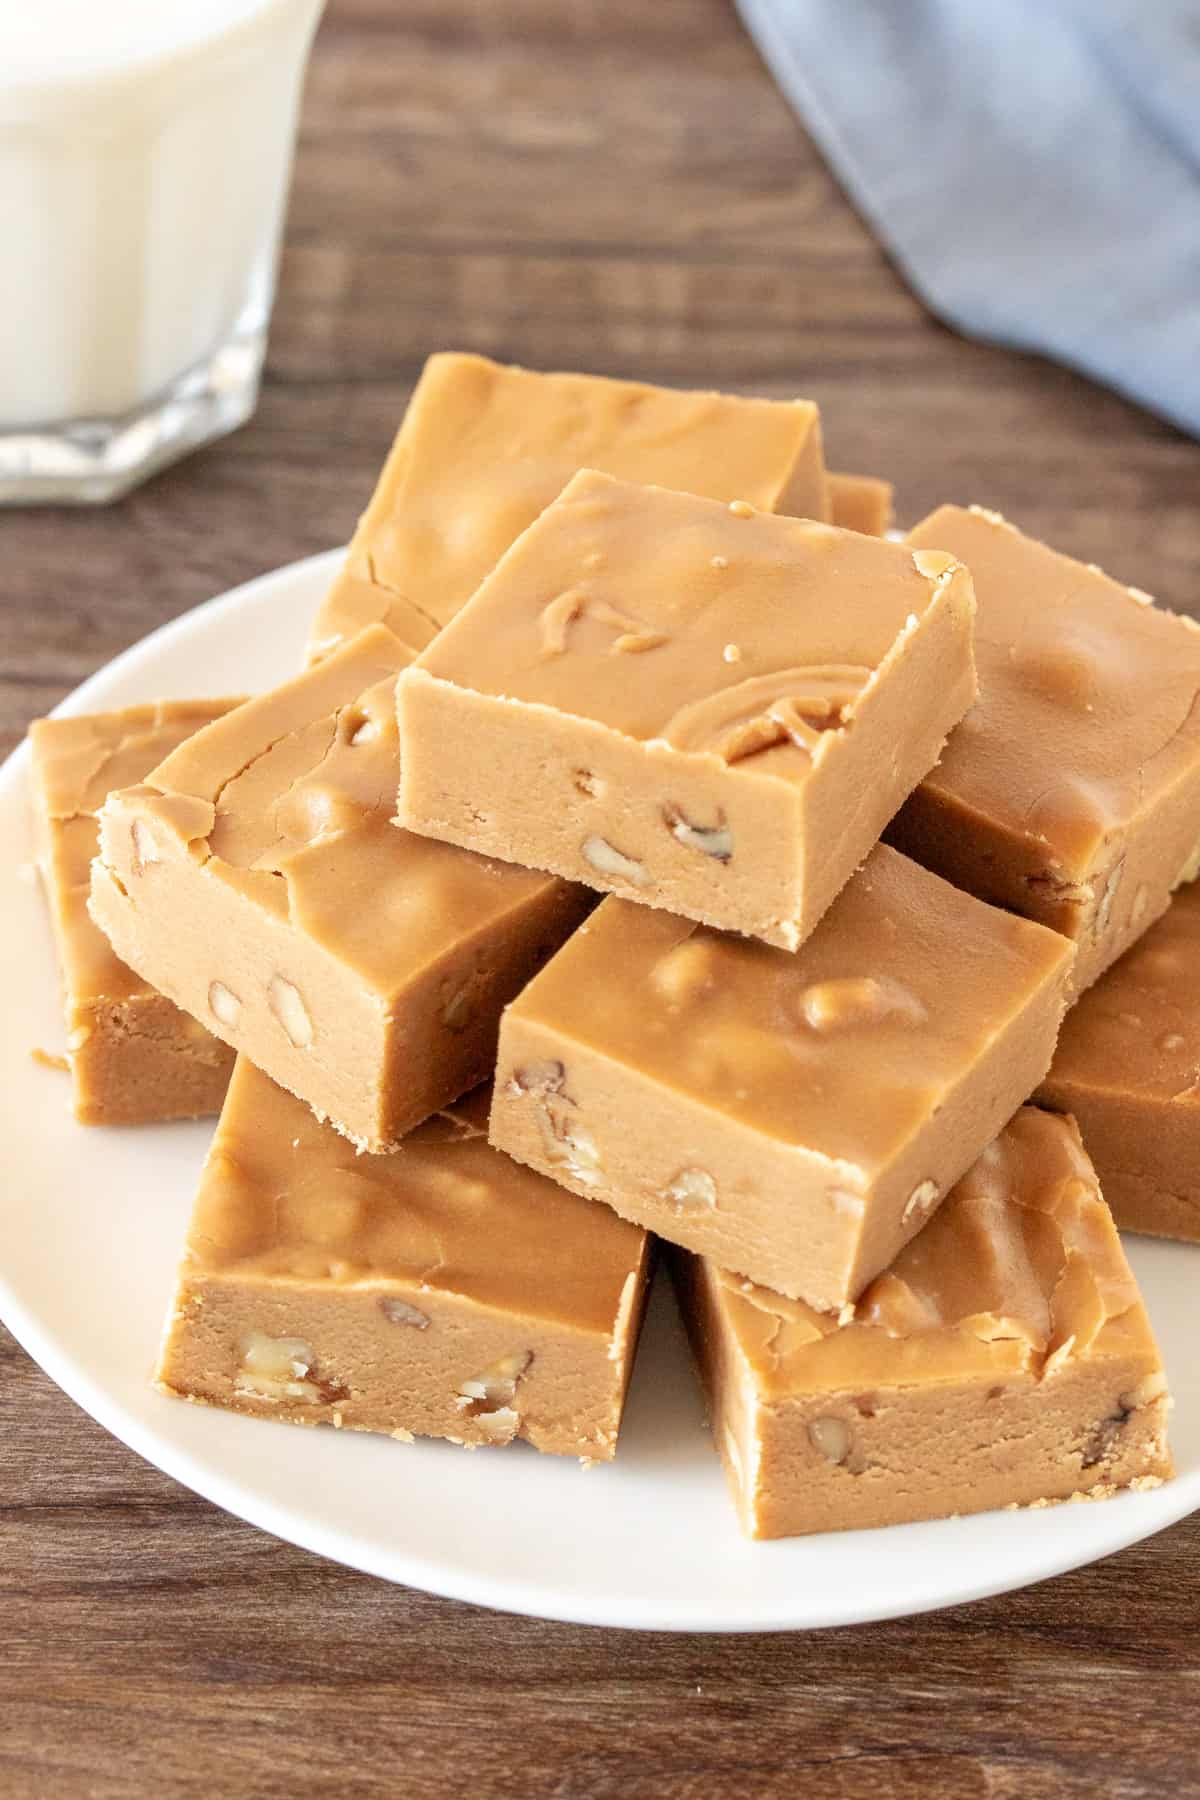 Plate of brown sugar fudge with a glass of milk.